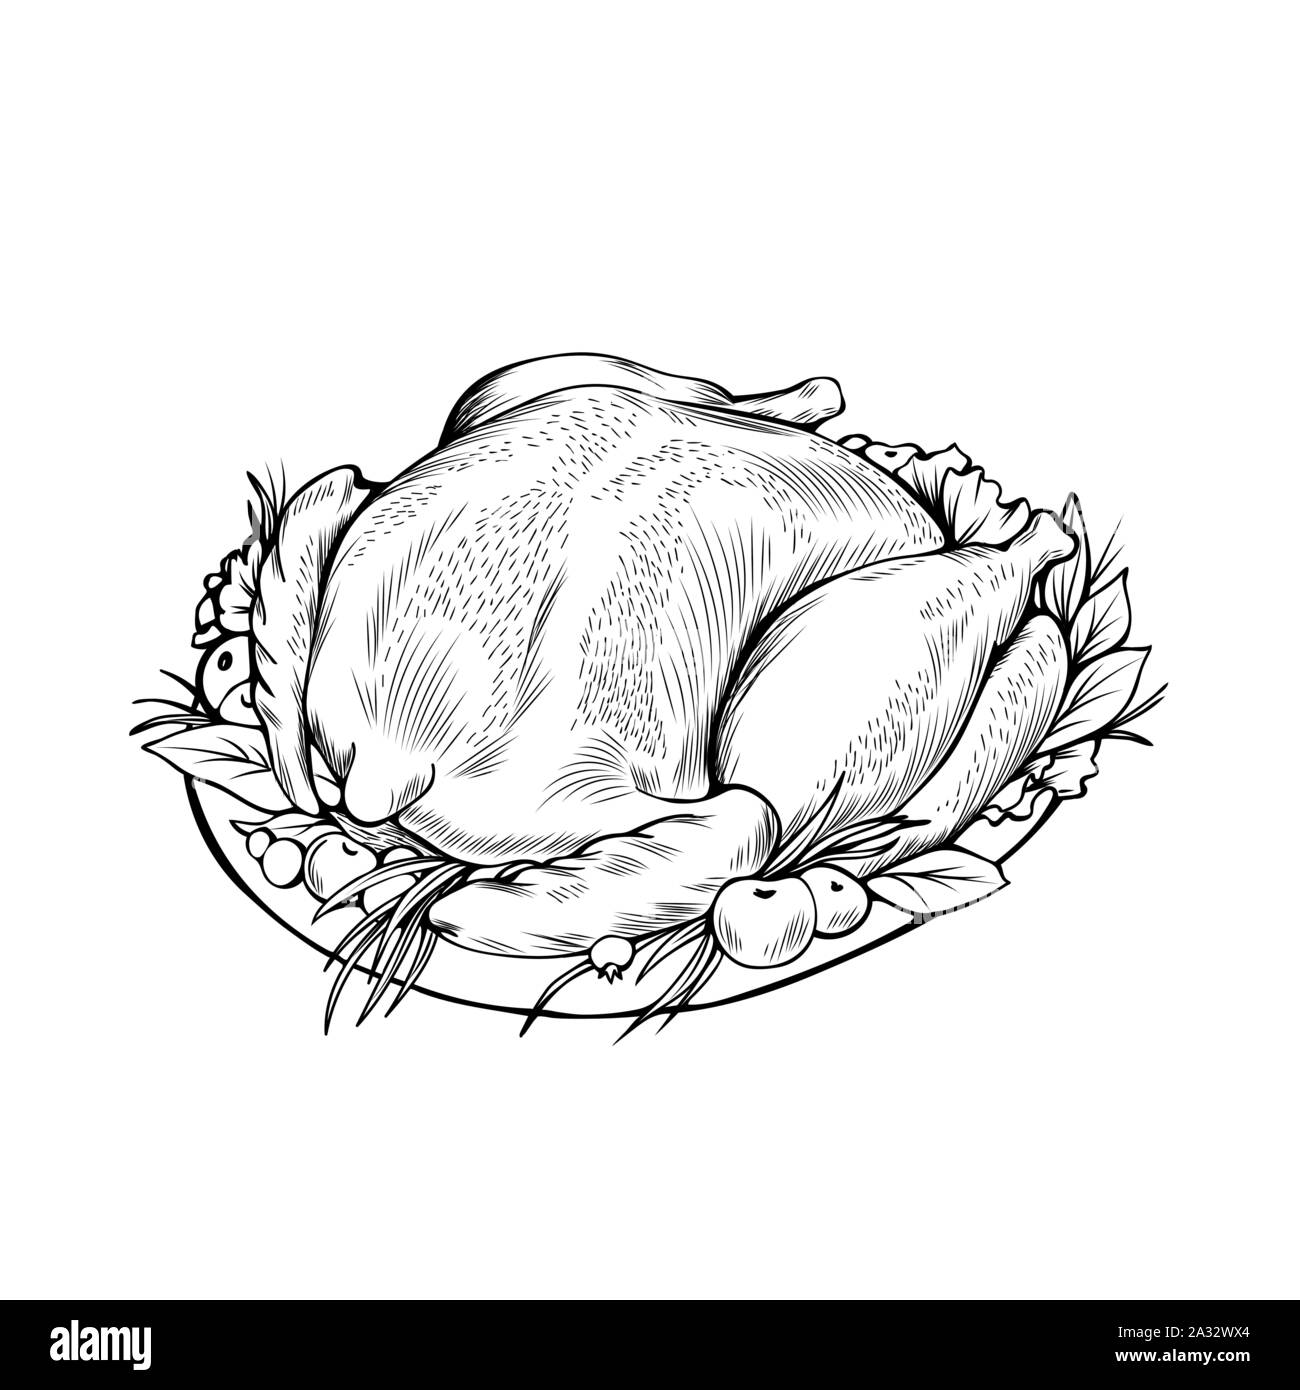 https://c8.alamy.com/comp/2A32WX4/cooked-chicken-hand-drawn-vector-illustration-autumn-season-holiday-thanksgiving-day-festive-dinner-thin-line-symbol-baked-turkey-with-garnish-monochrome-drawing-traditional-homemade-dish-2A32WX4.jpg